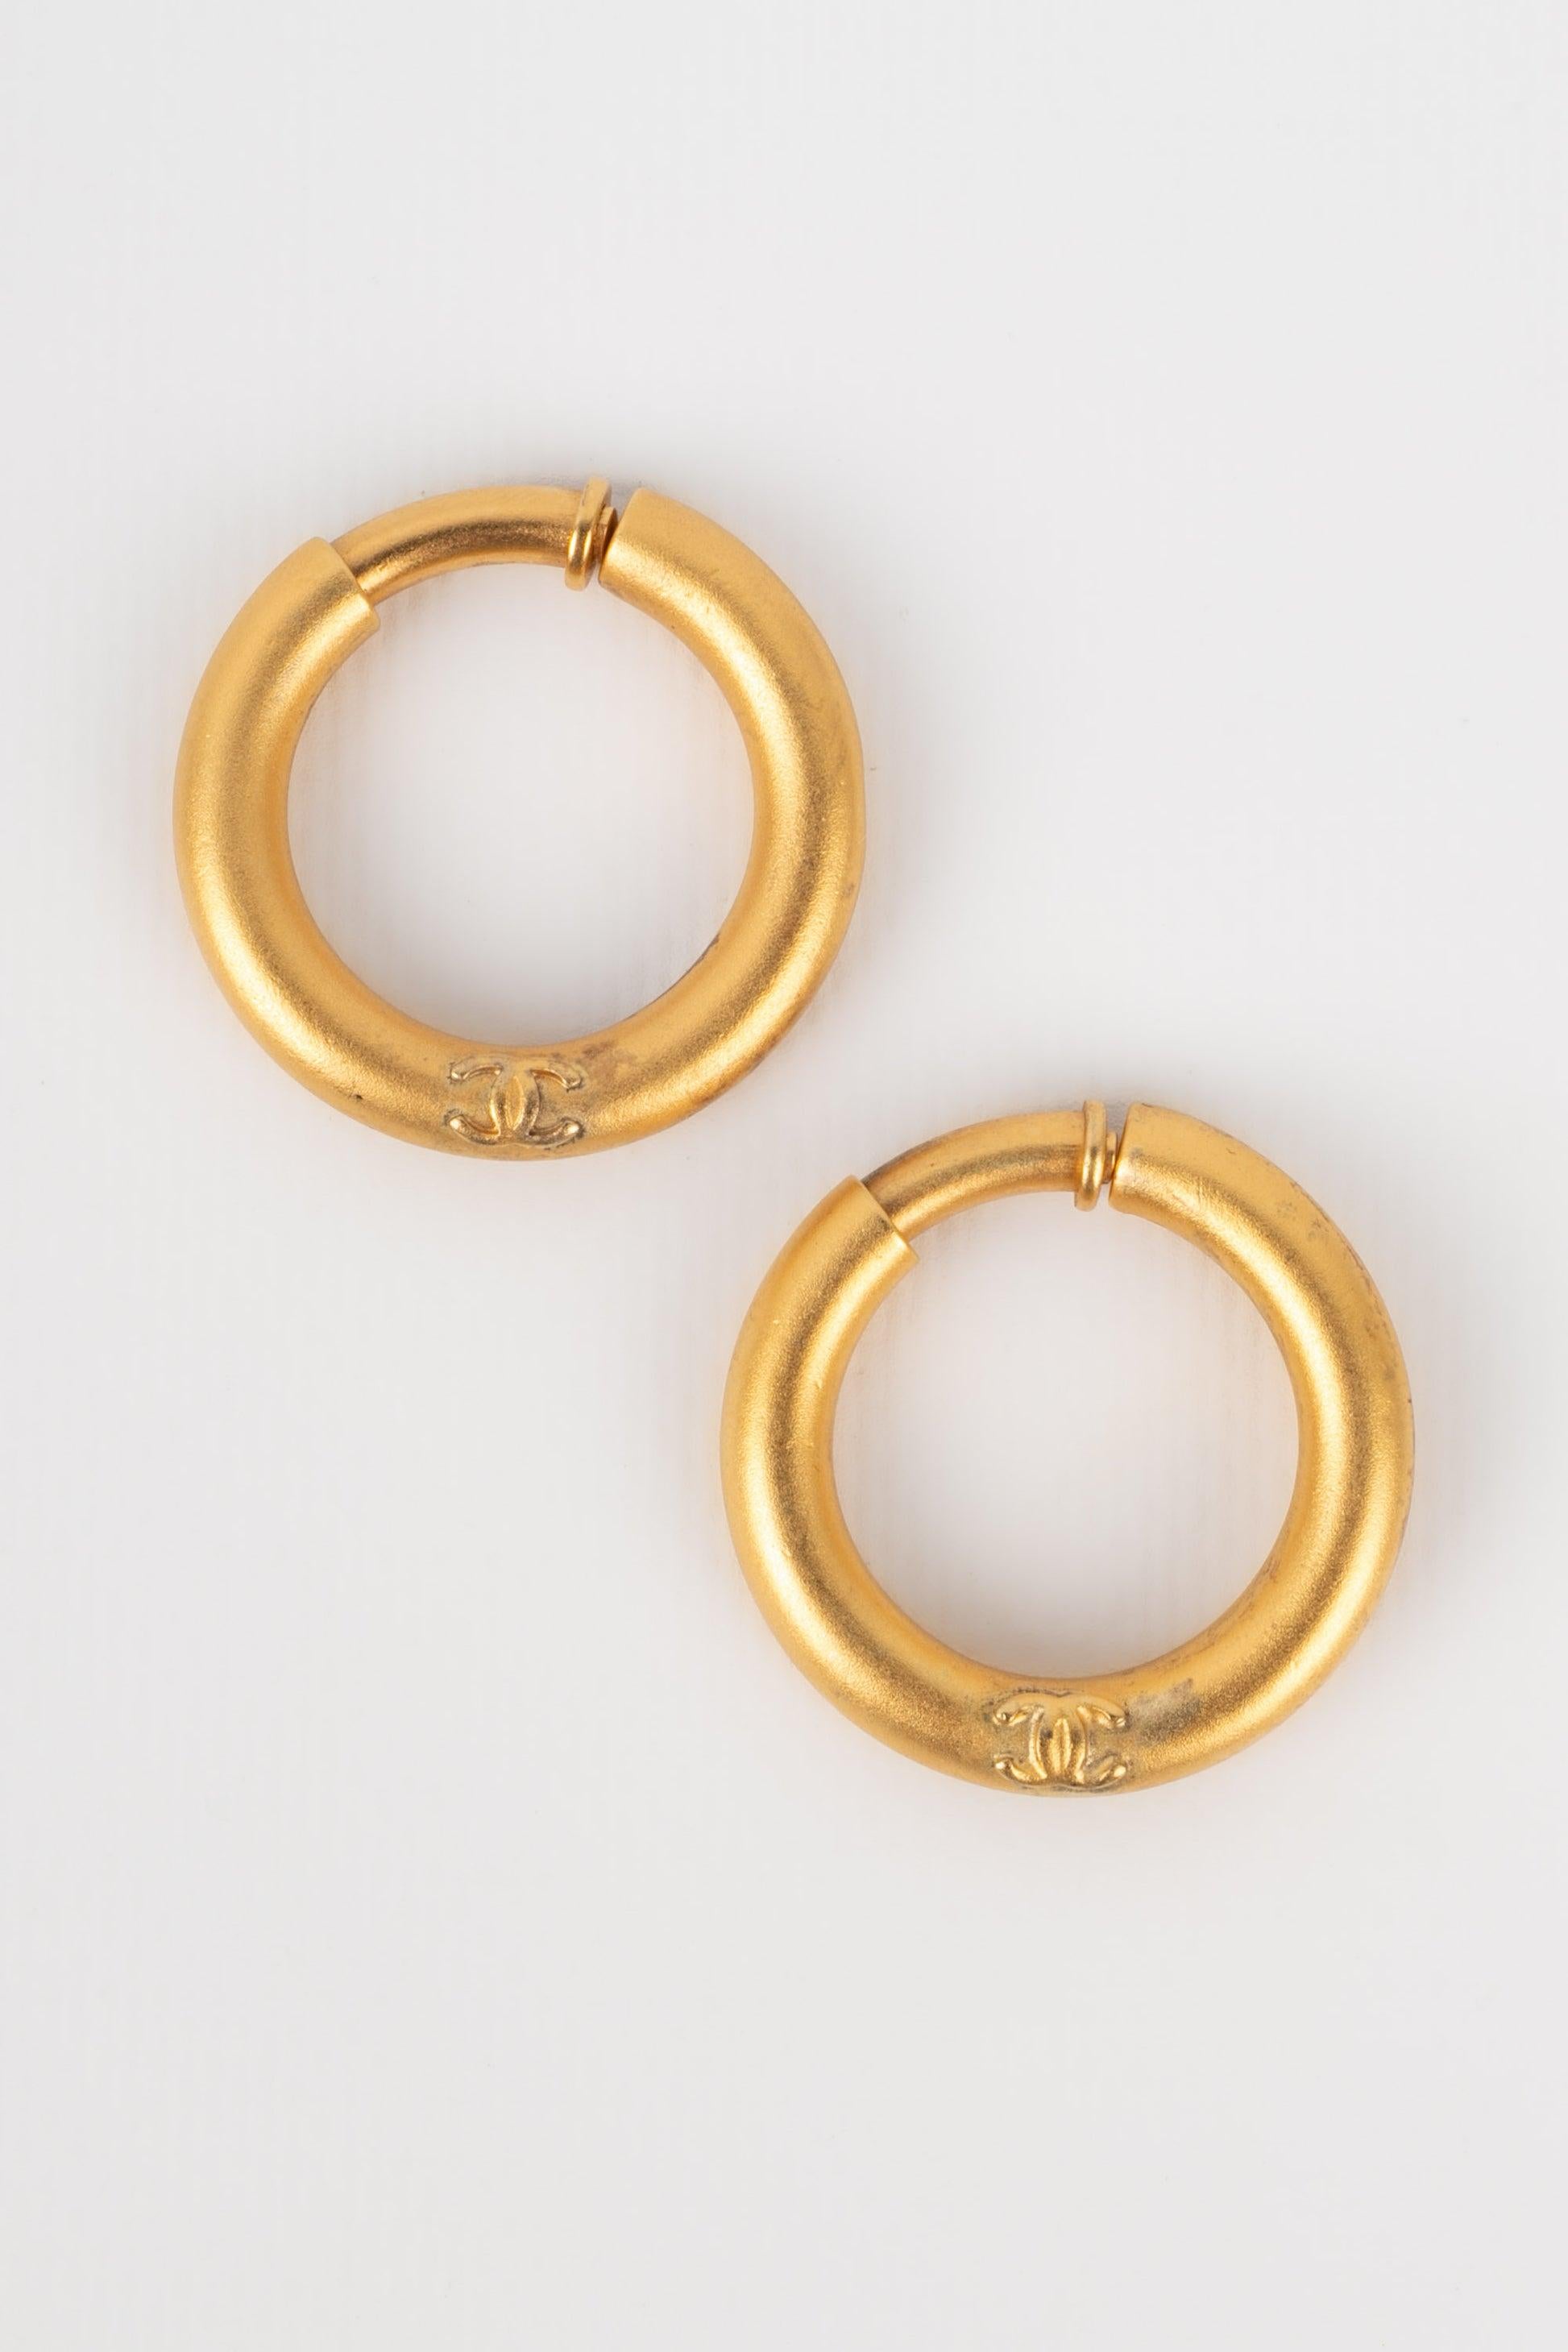 Chanel Golden Metal Round Earrings, 1996 In Excellent Condition For Sale In SAINT-OUEN-SUR-SEINE, FR